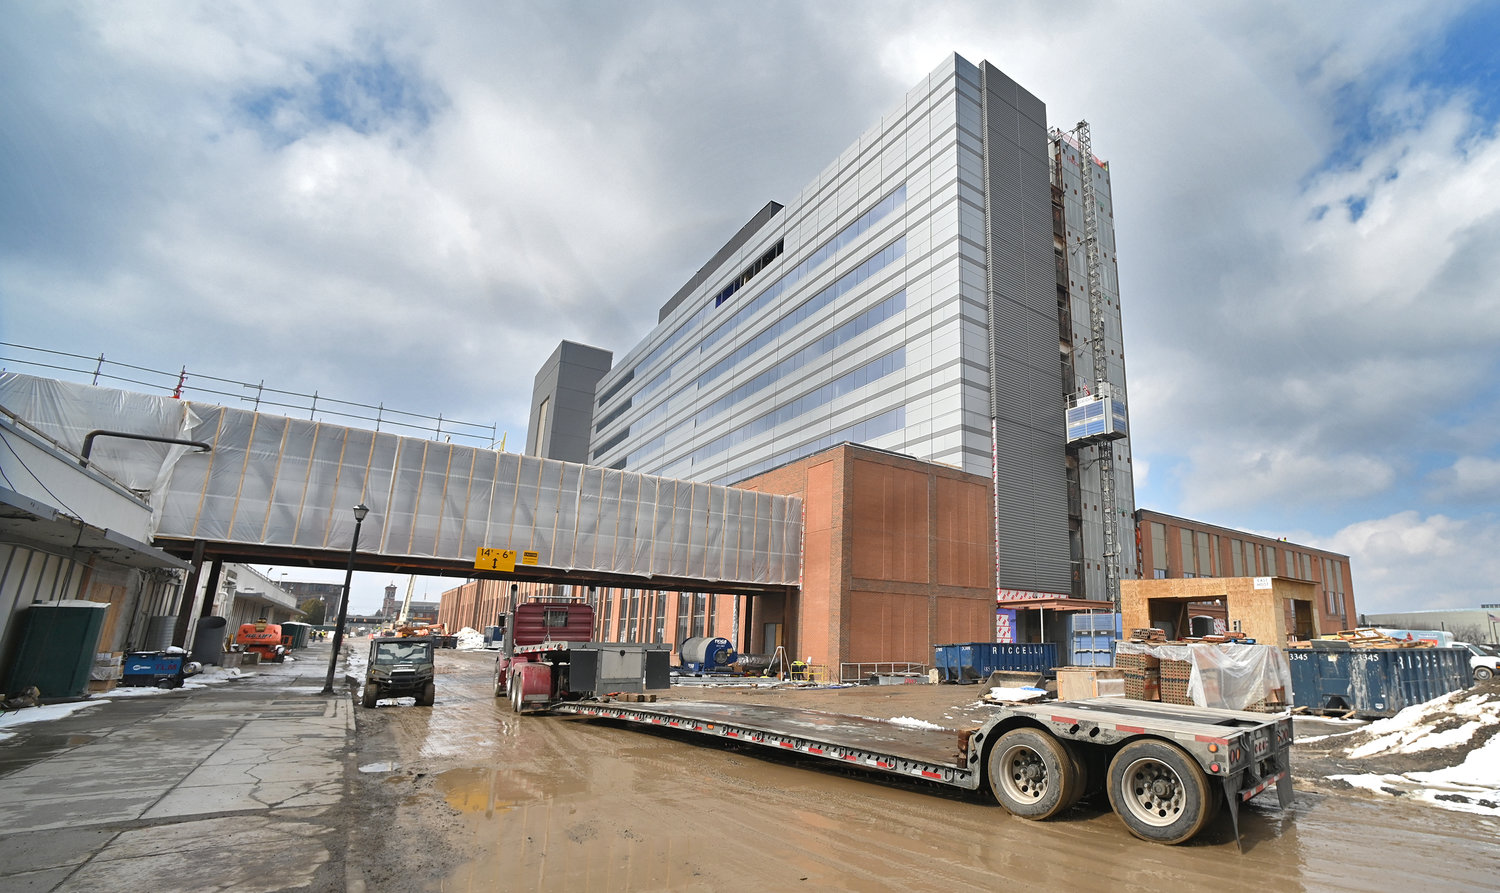 MOVING PARTS — A  truck goes under the Columbia Street pedestrian bridge of the Wynn Hospital in Utica on March 10, 2022.